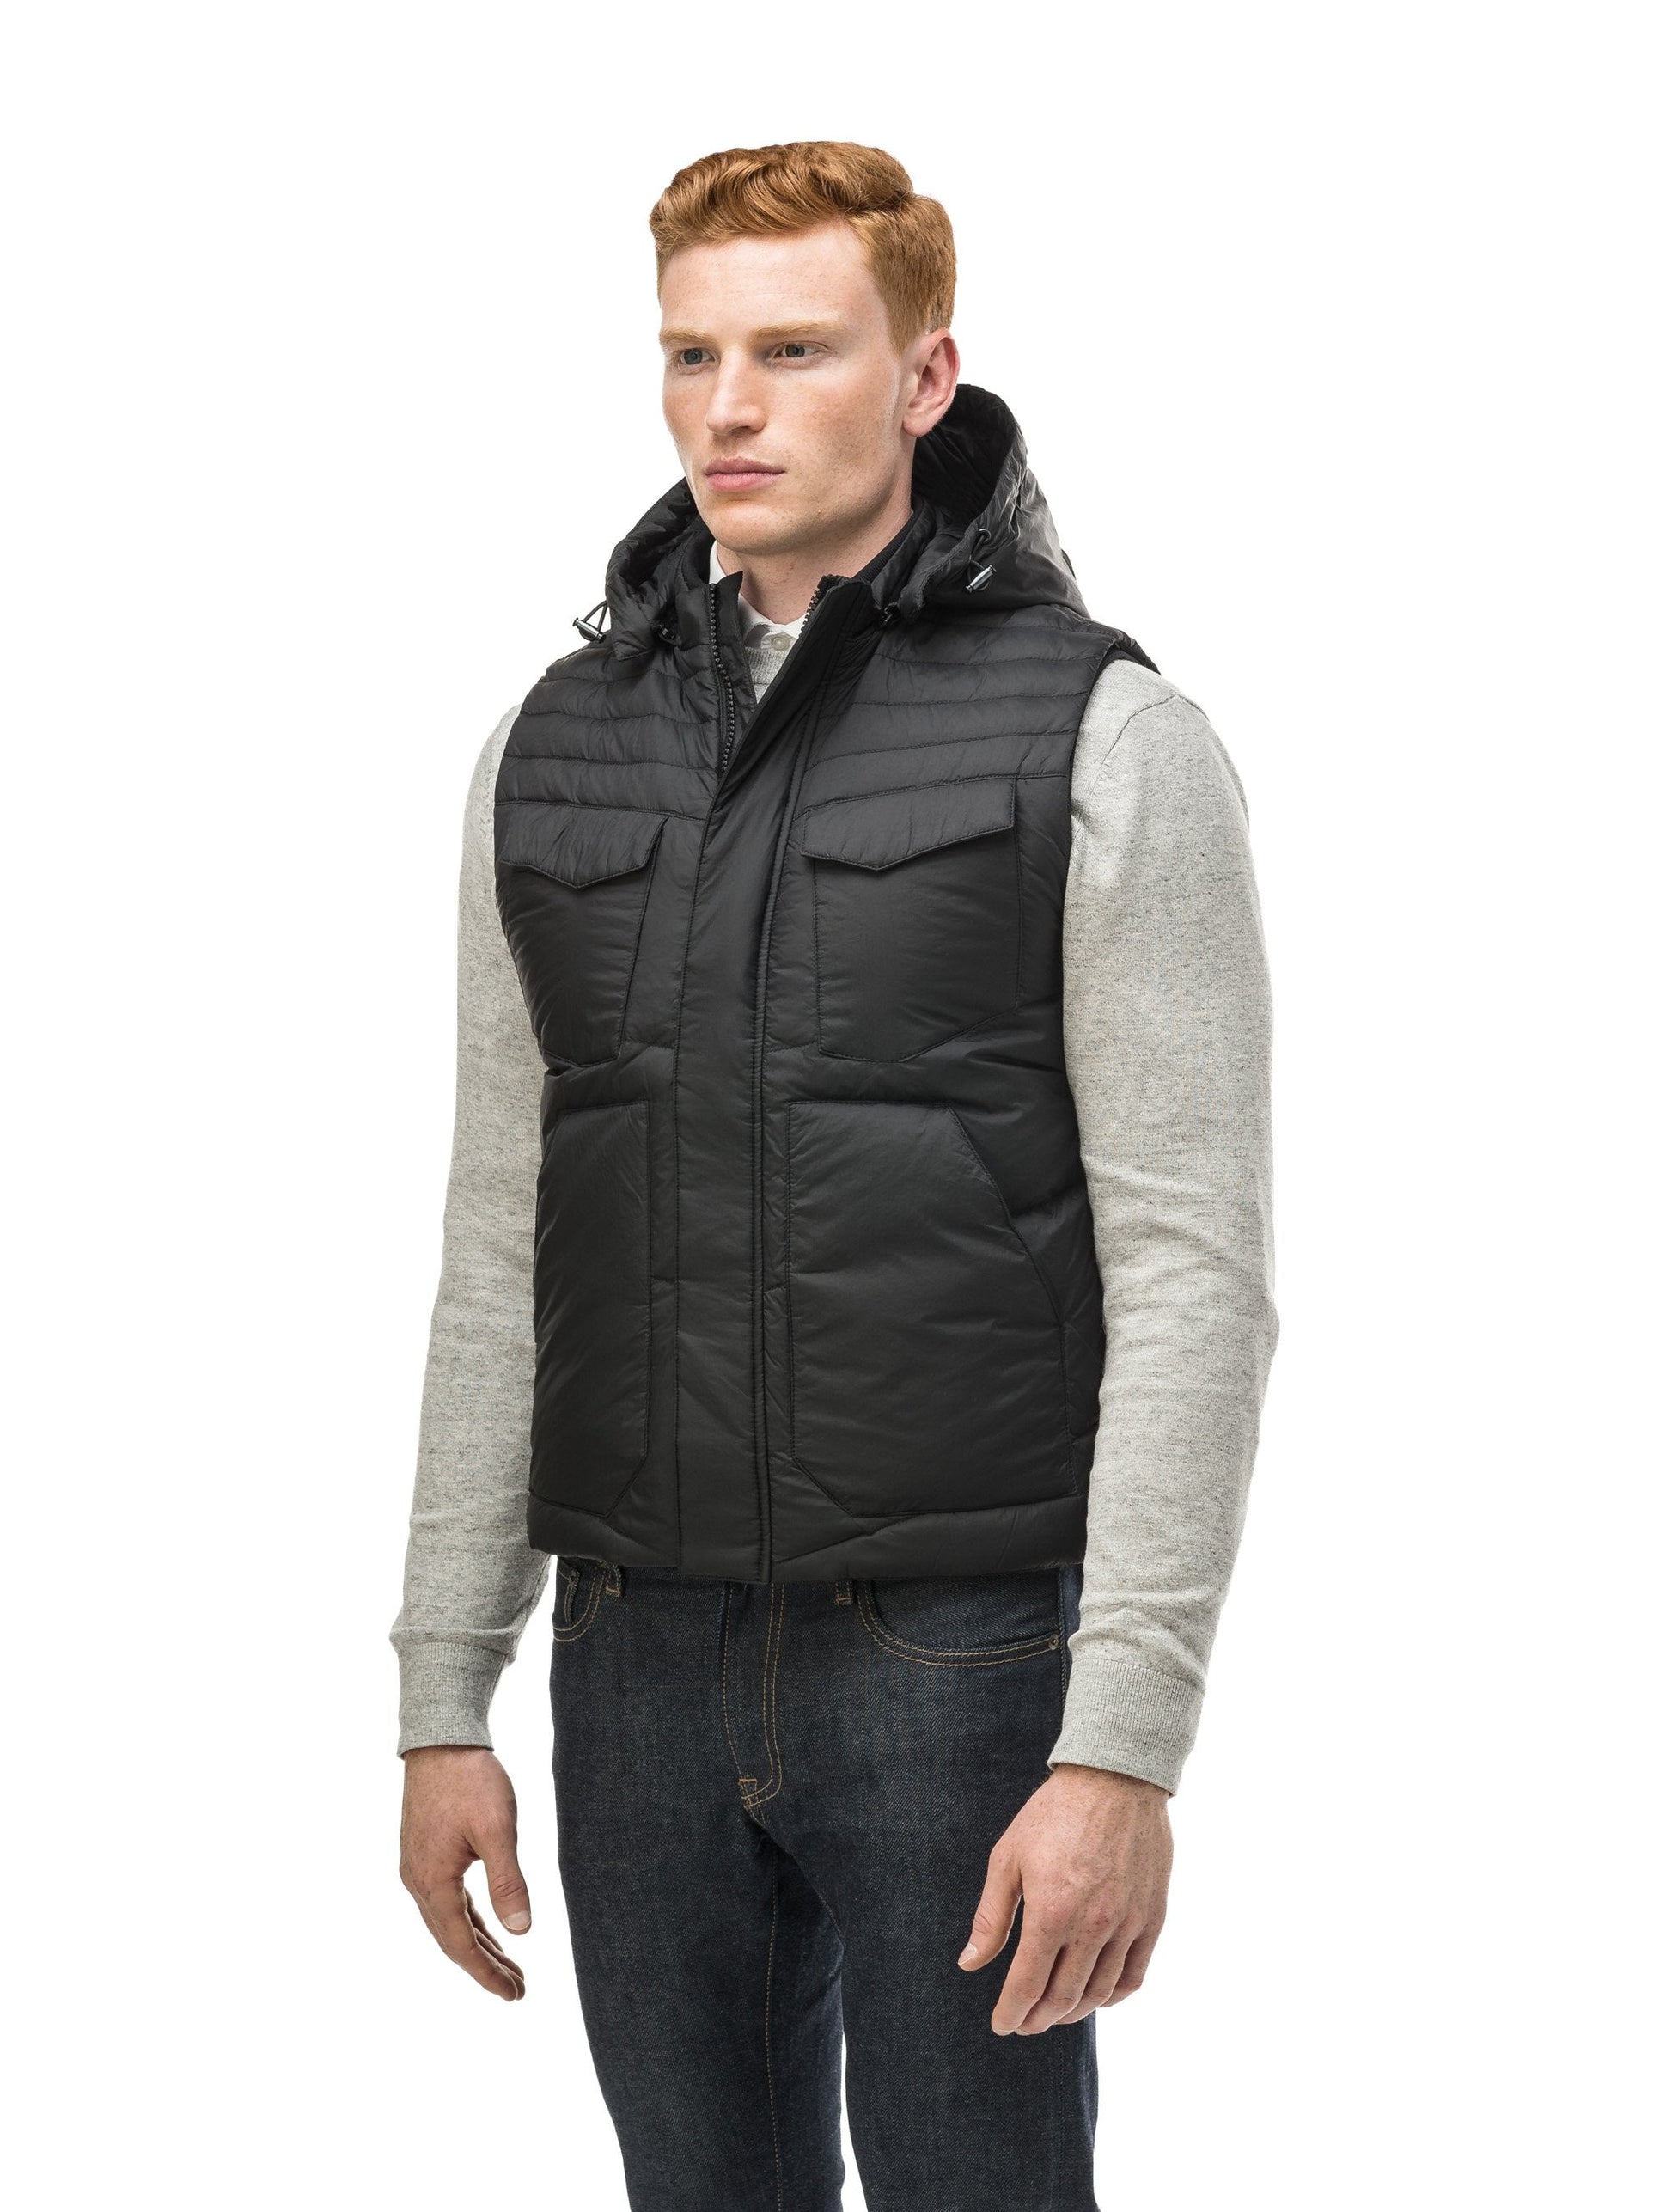 Men's lightweight vest with accents like our removable hood and chevron quilting in Black